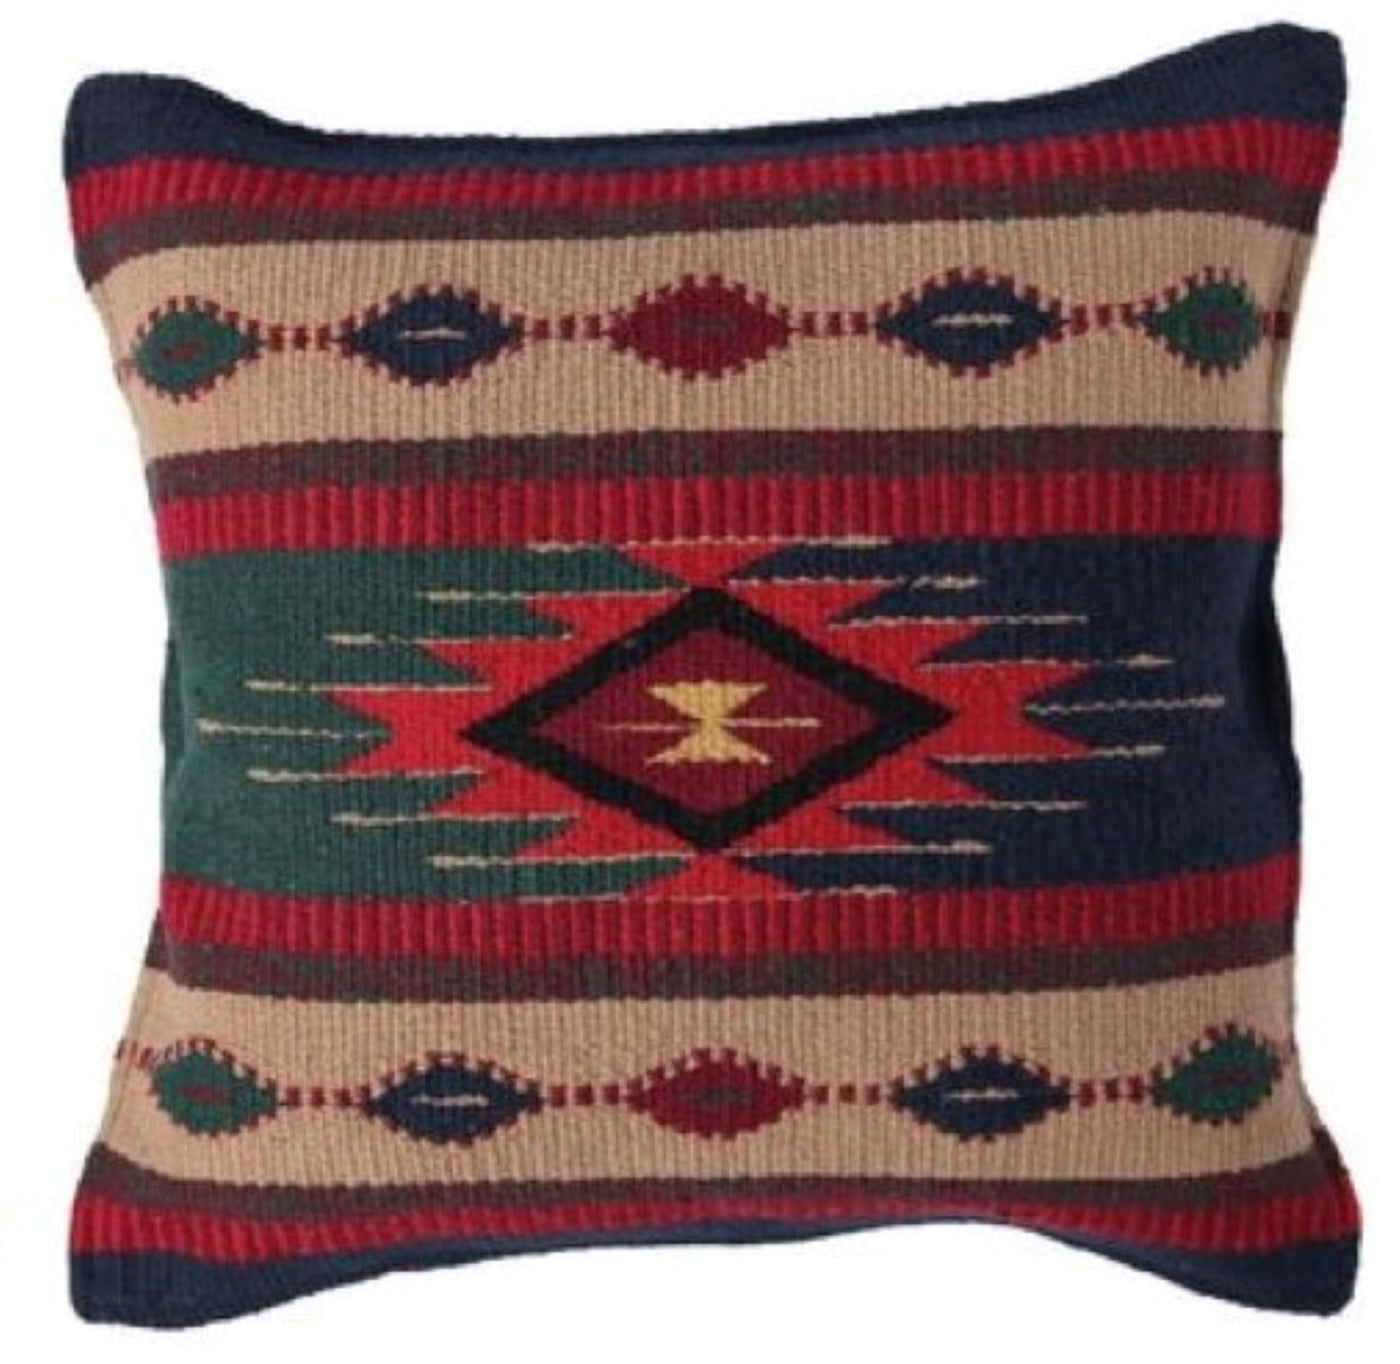 https://www.ranchjunkie.com/cdn/shop/products/pillow-covers-b-pillow-cover-only-southwestern-handwoven-aztec-pillow-covers-assorted-colors-18-x-18-throw-pillow-ranch-junkie-mercantile-34094998290601.jpg?v=1643089019&width=1400